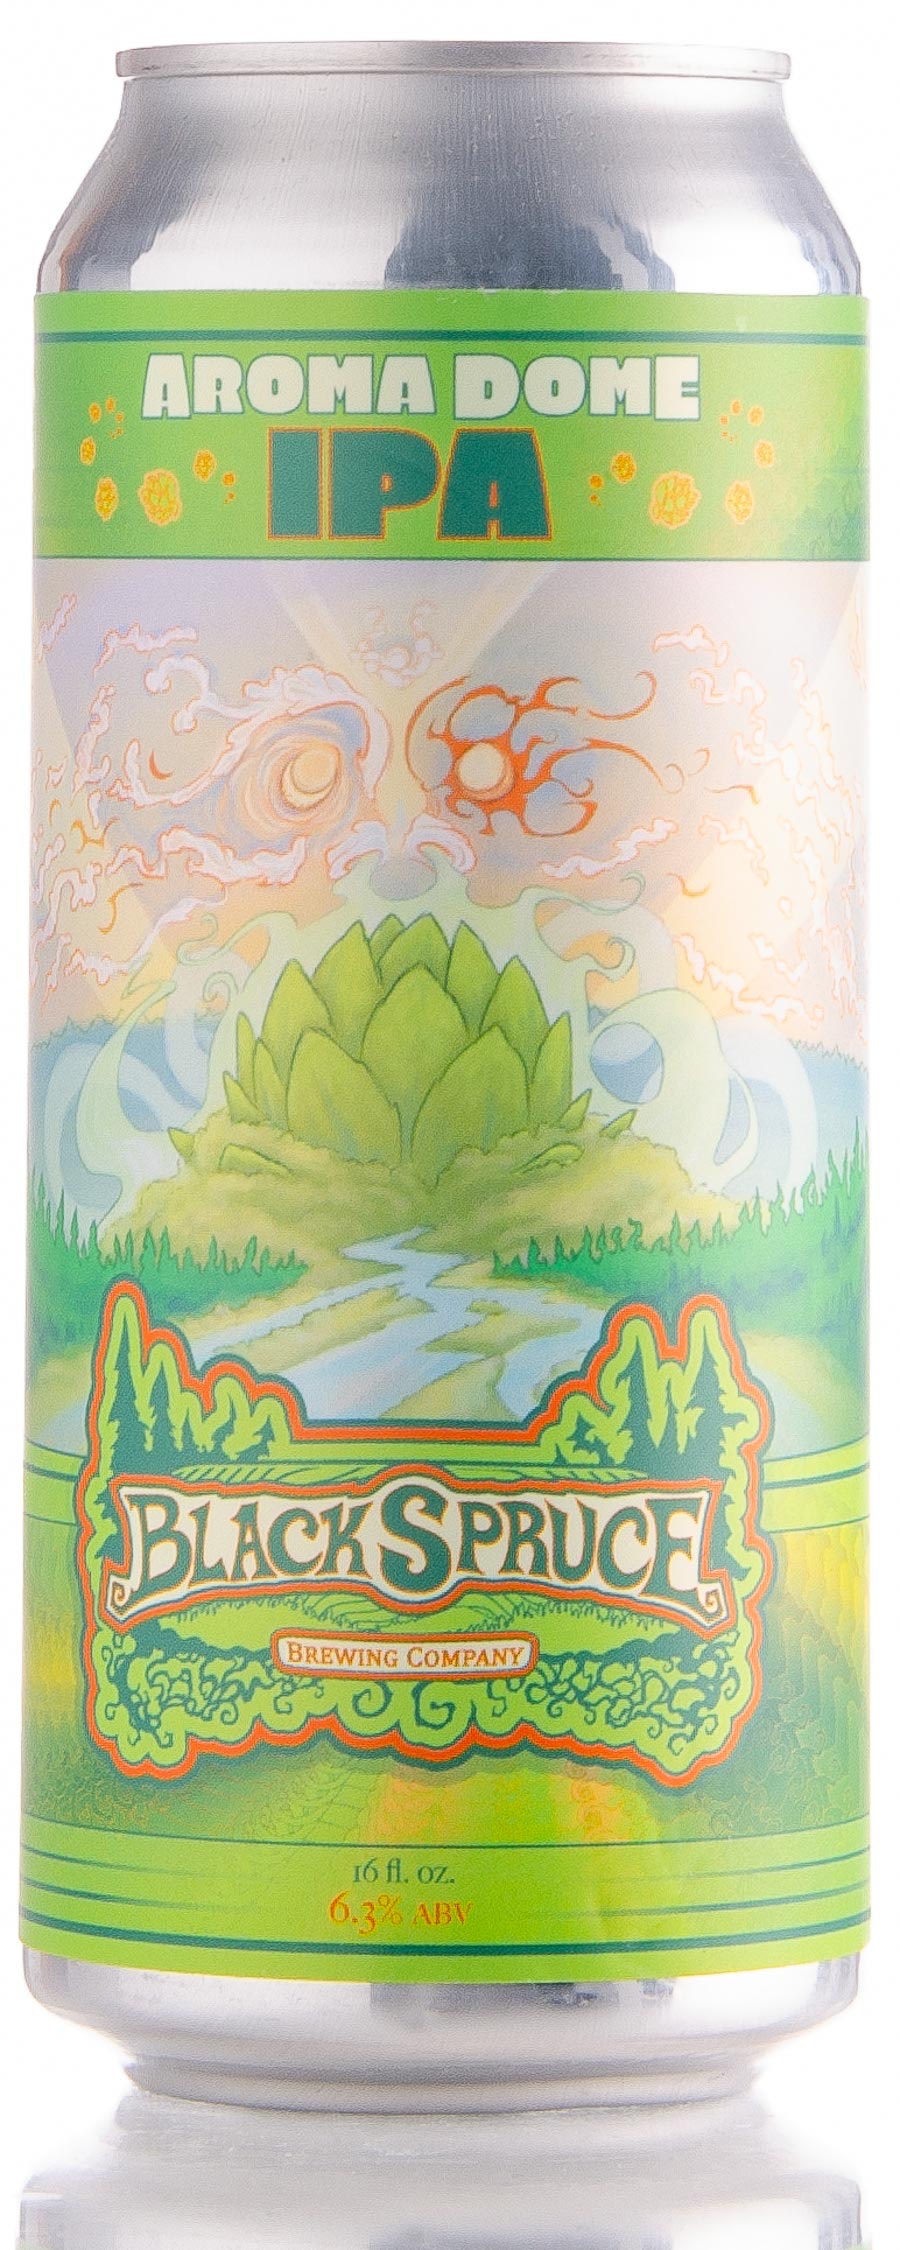 Black Spruce Brewing Company Aroma Dome Review